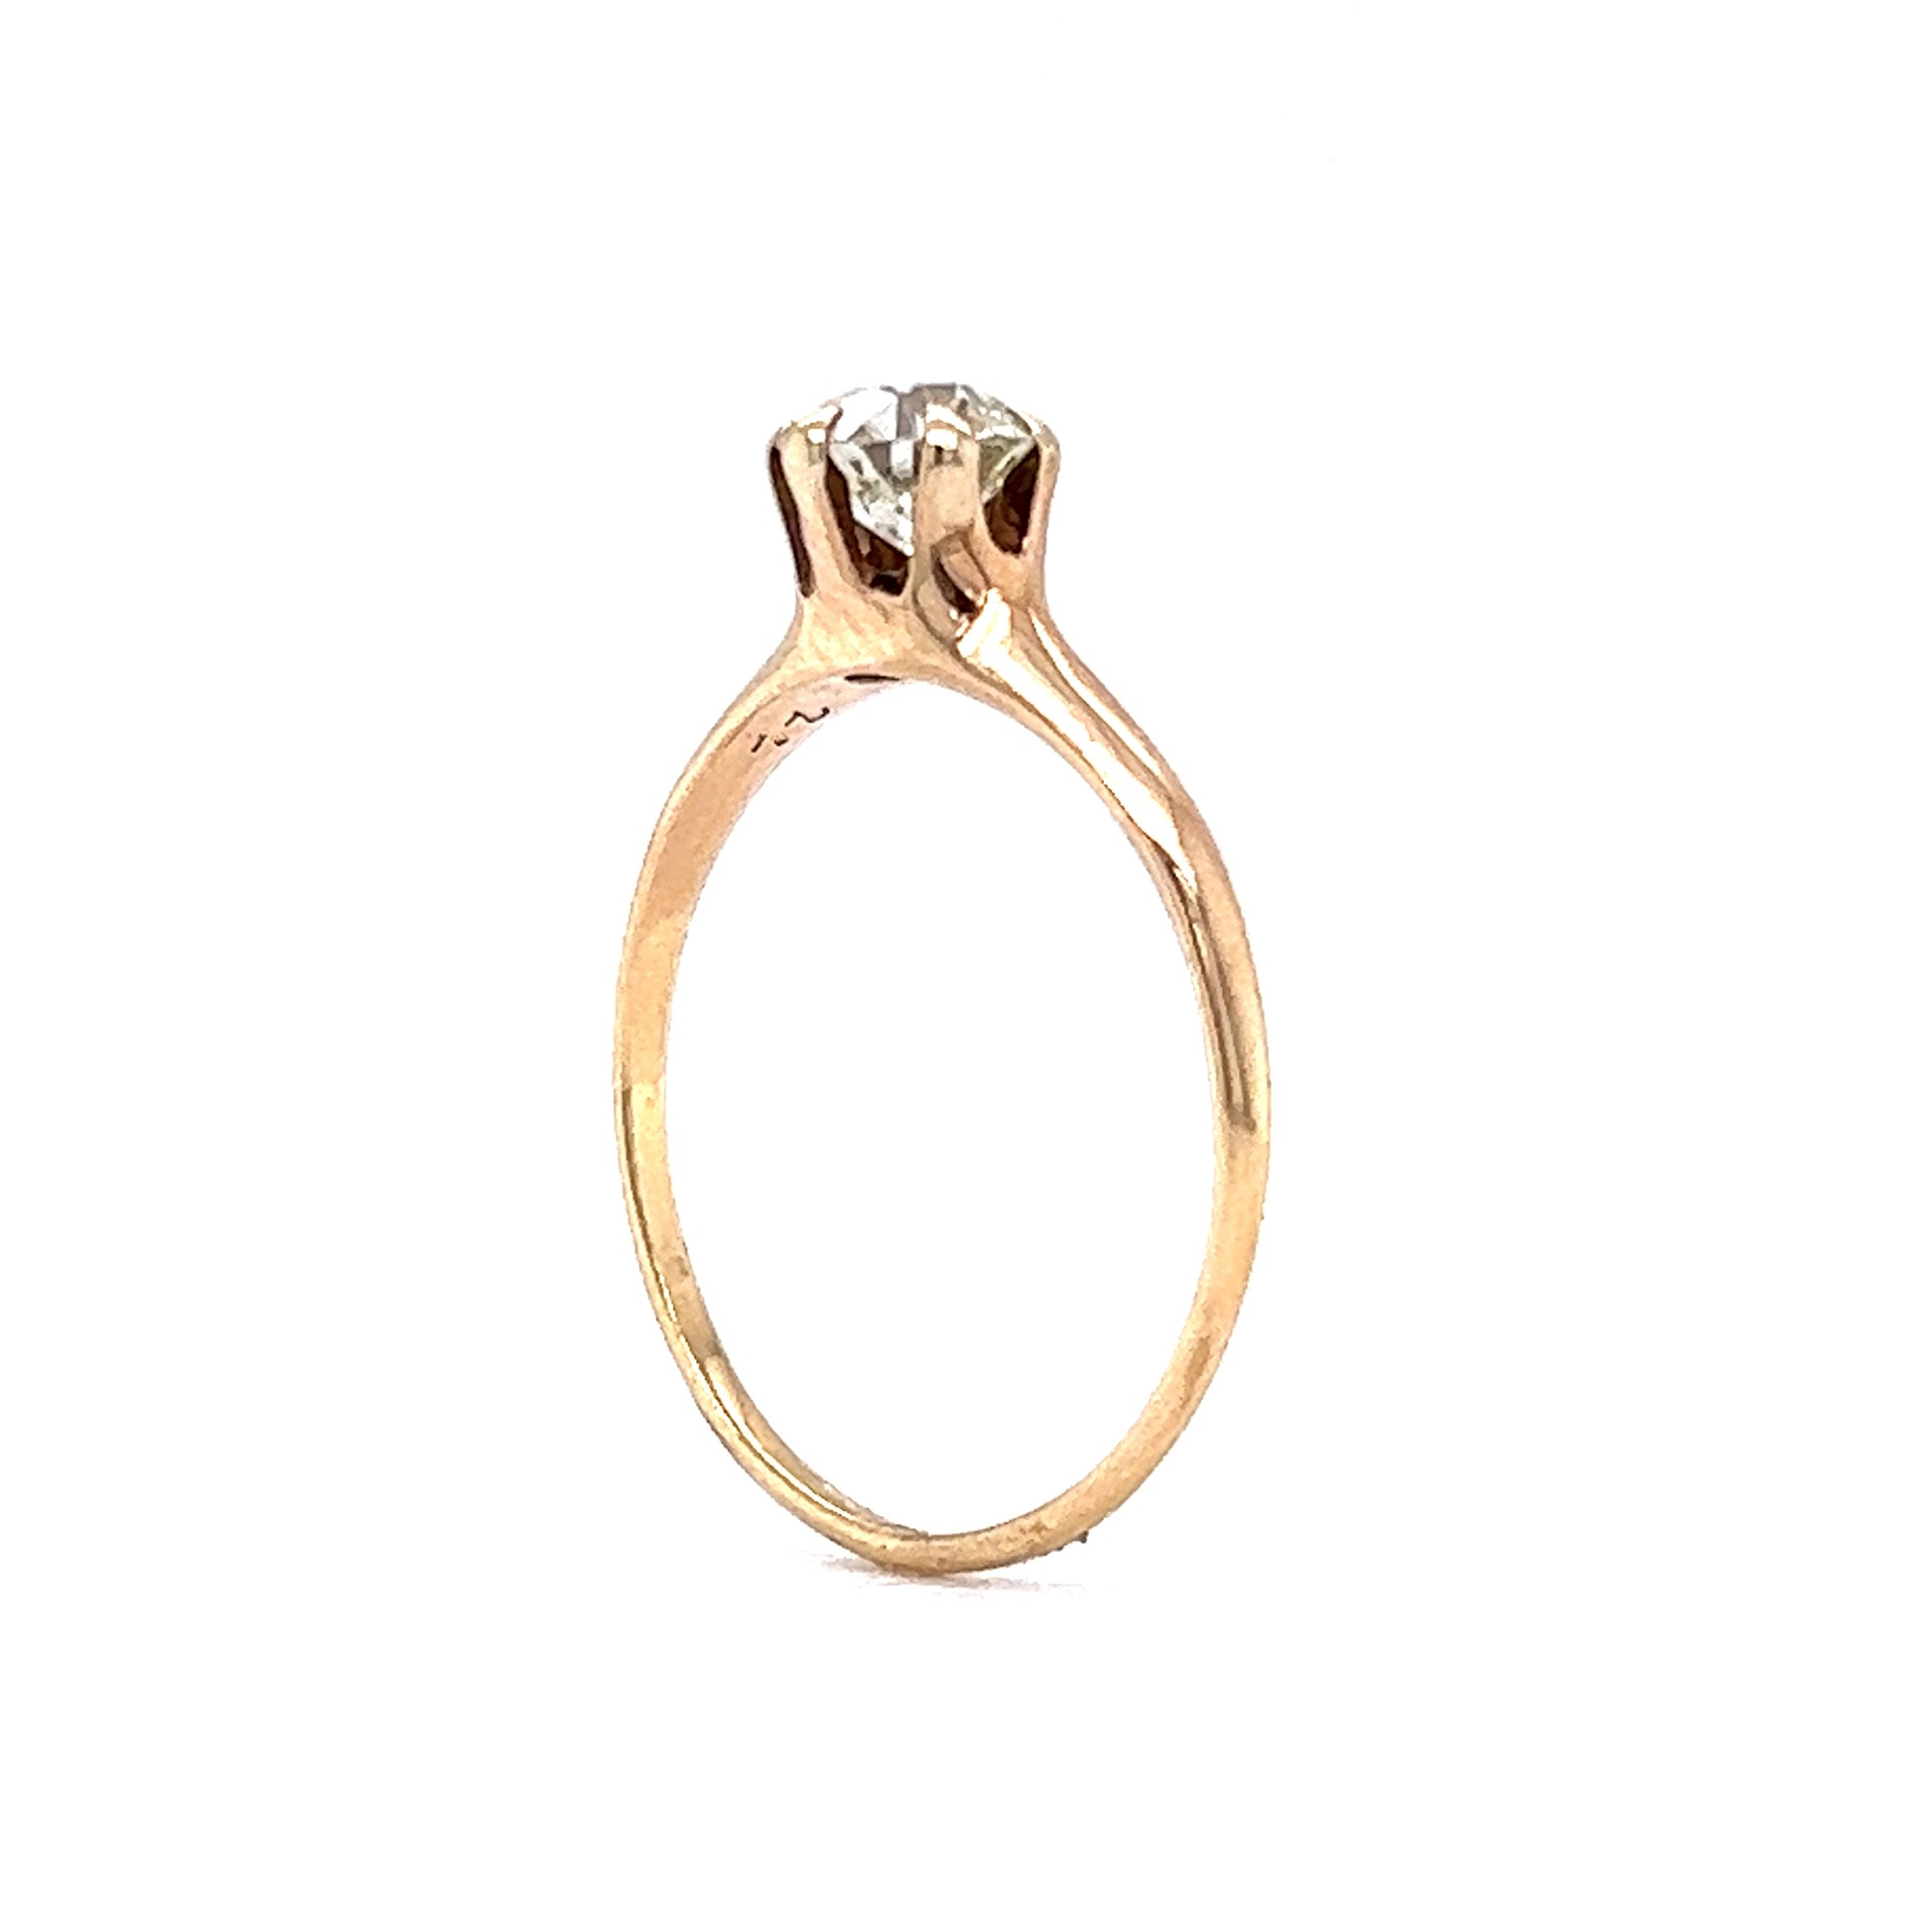 Solitaire Victorian .60 Diamond Engagement Ring in 14k Yellow GoldComposition: 14 Karat Yellow GoldRing Size: 7Total Diamond Weight: .60 ctTotal Gram Weight: 1.4 gInscription: 22